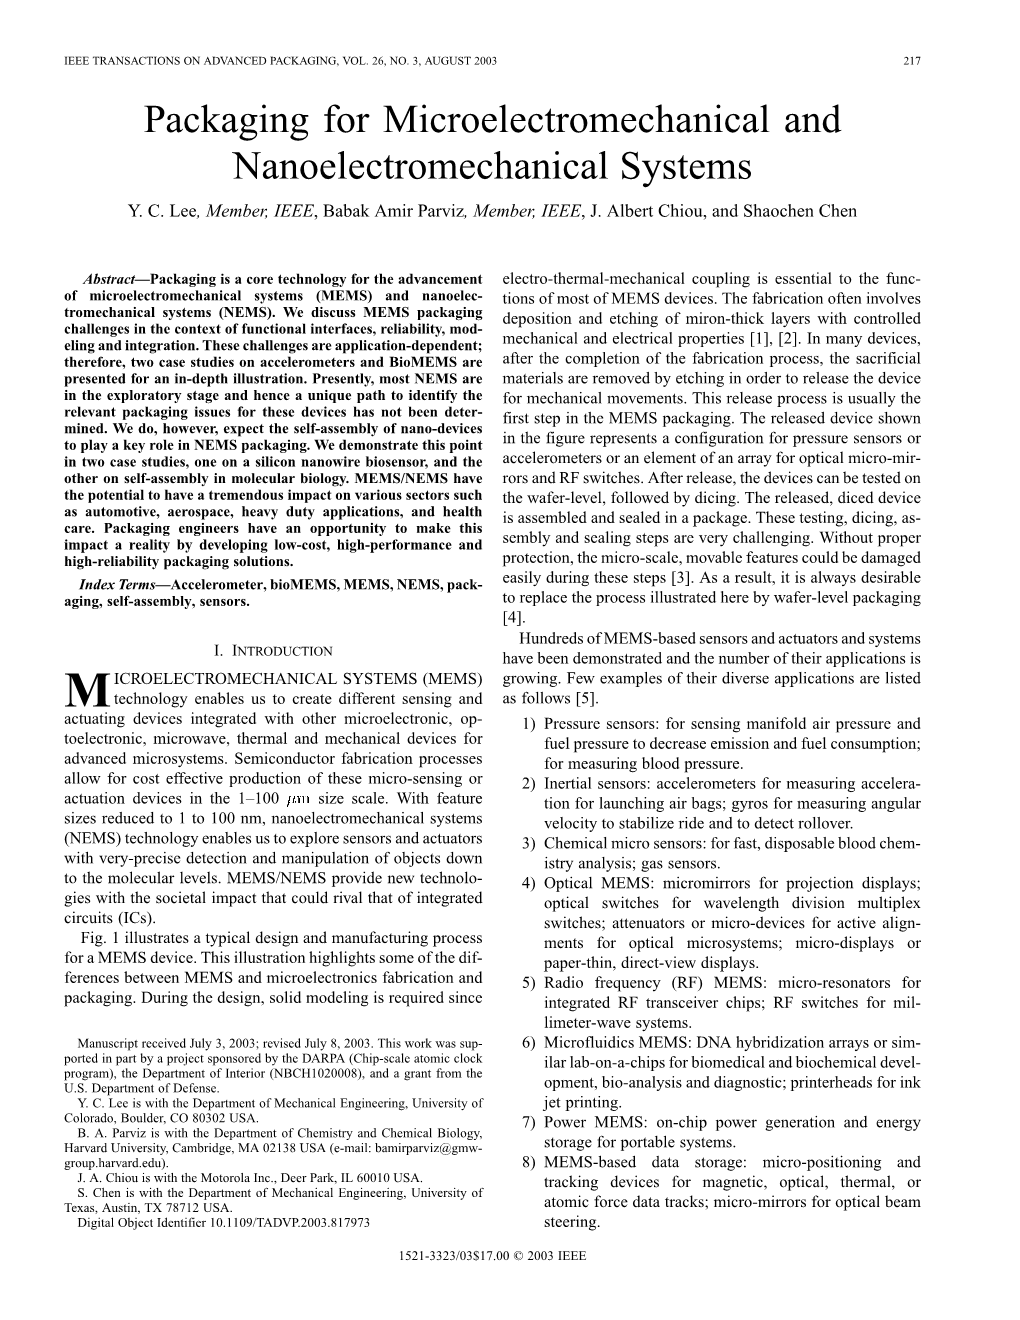 Packaging for Microelectromechanical and Nanoelectromechanical Systems Y